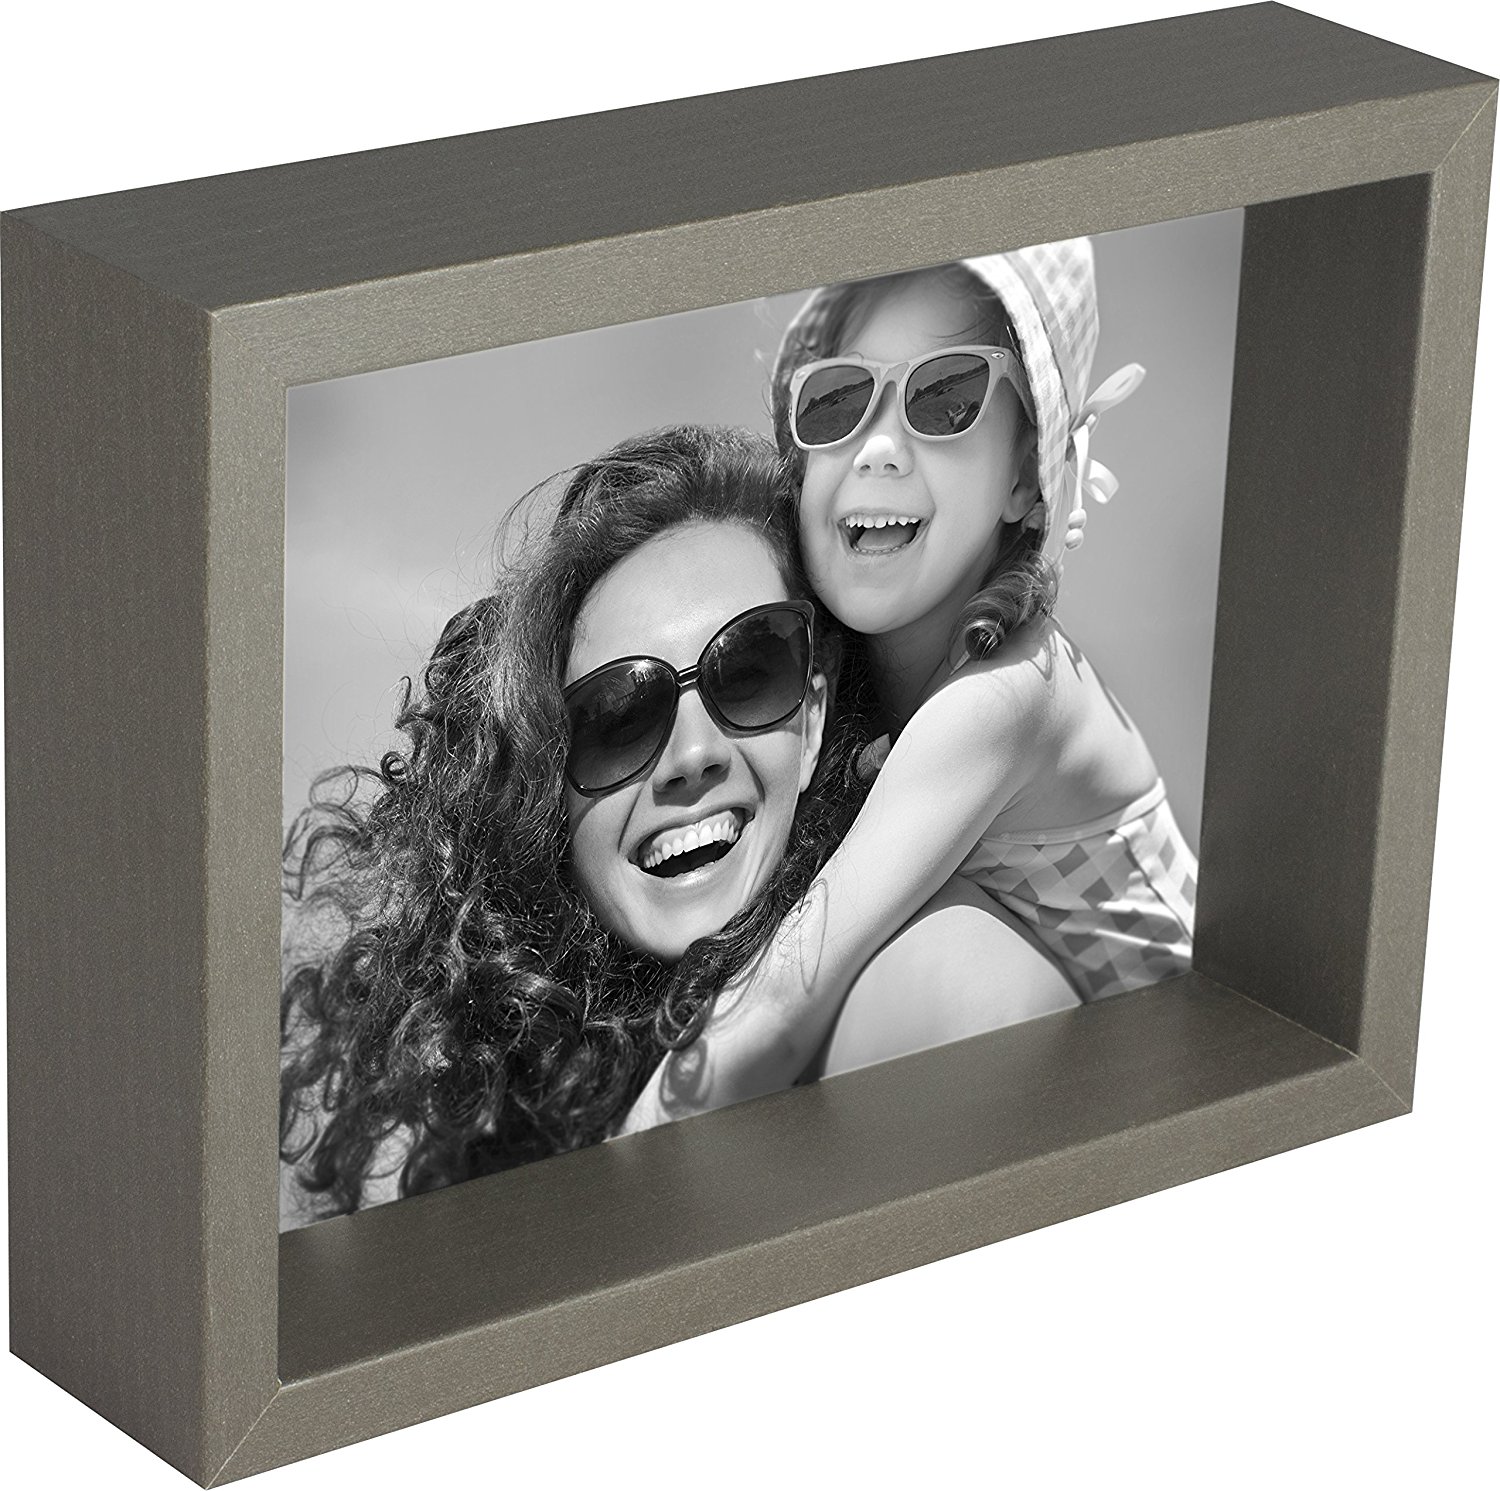 5 x 7-Inch Box Picture Photo Frame, Grey